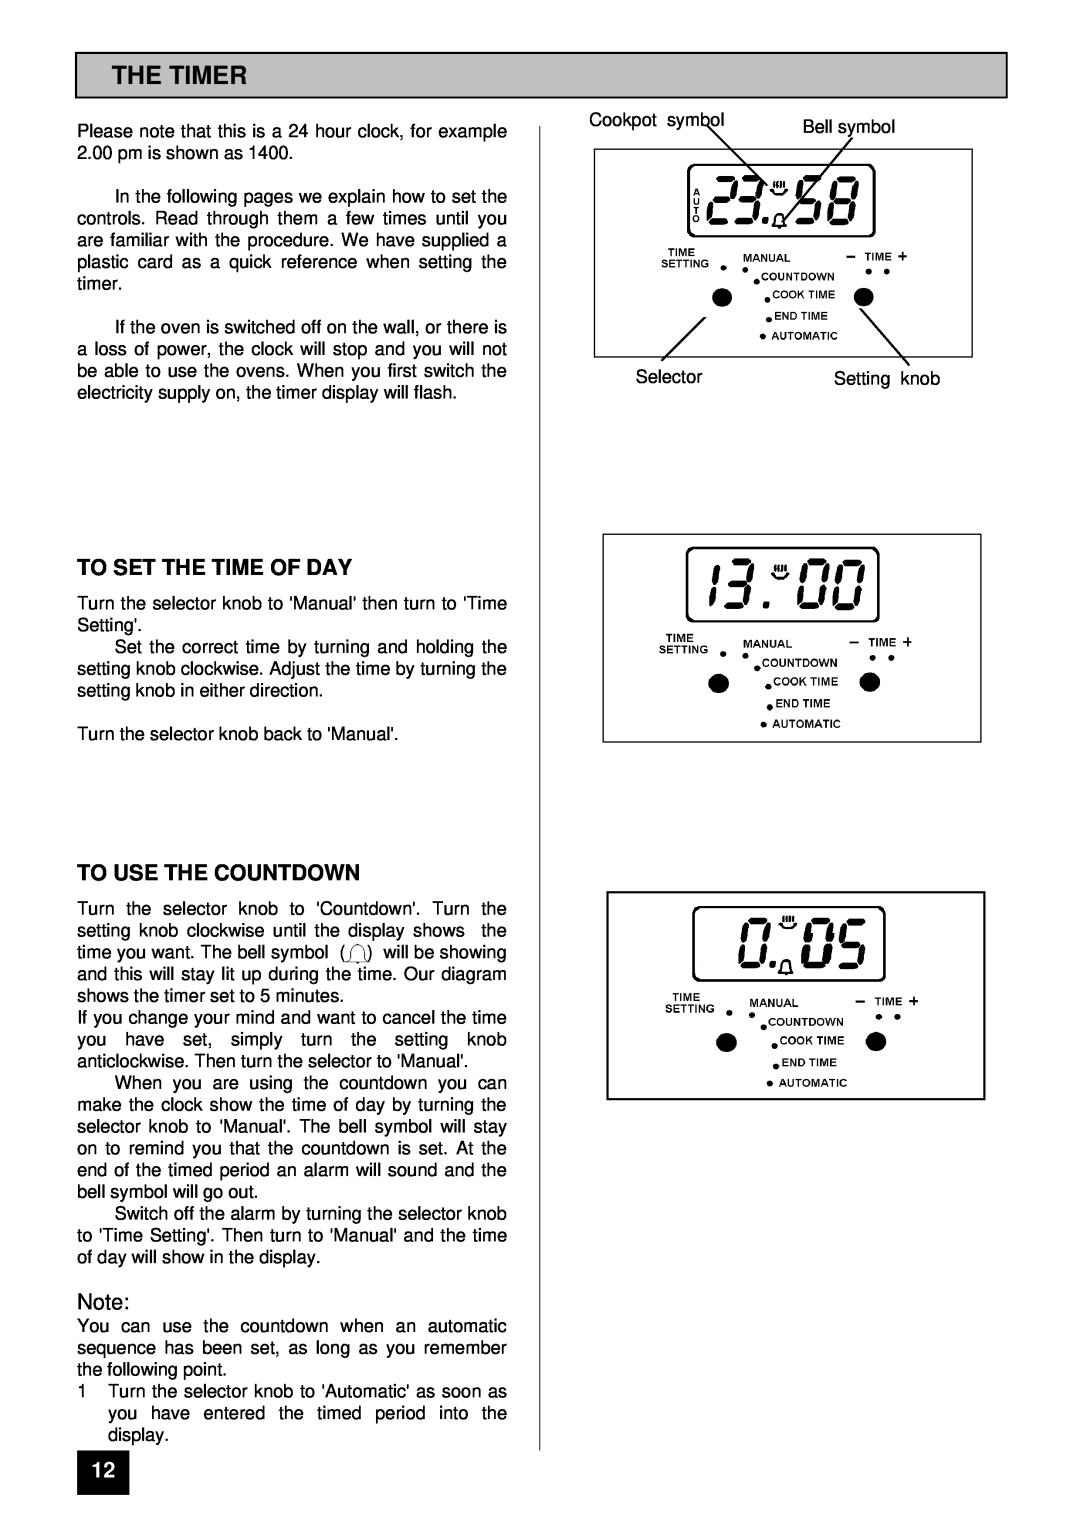 Zanussi ZCE ID manual The Timer, To Set The Time Of Day, To Use The Countdown 